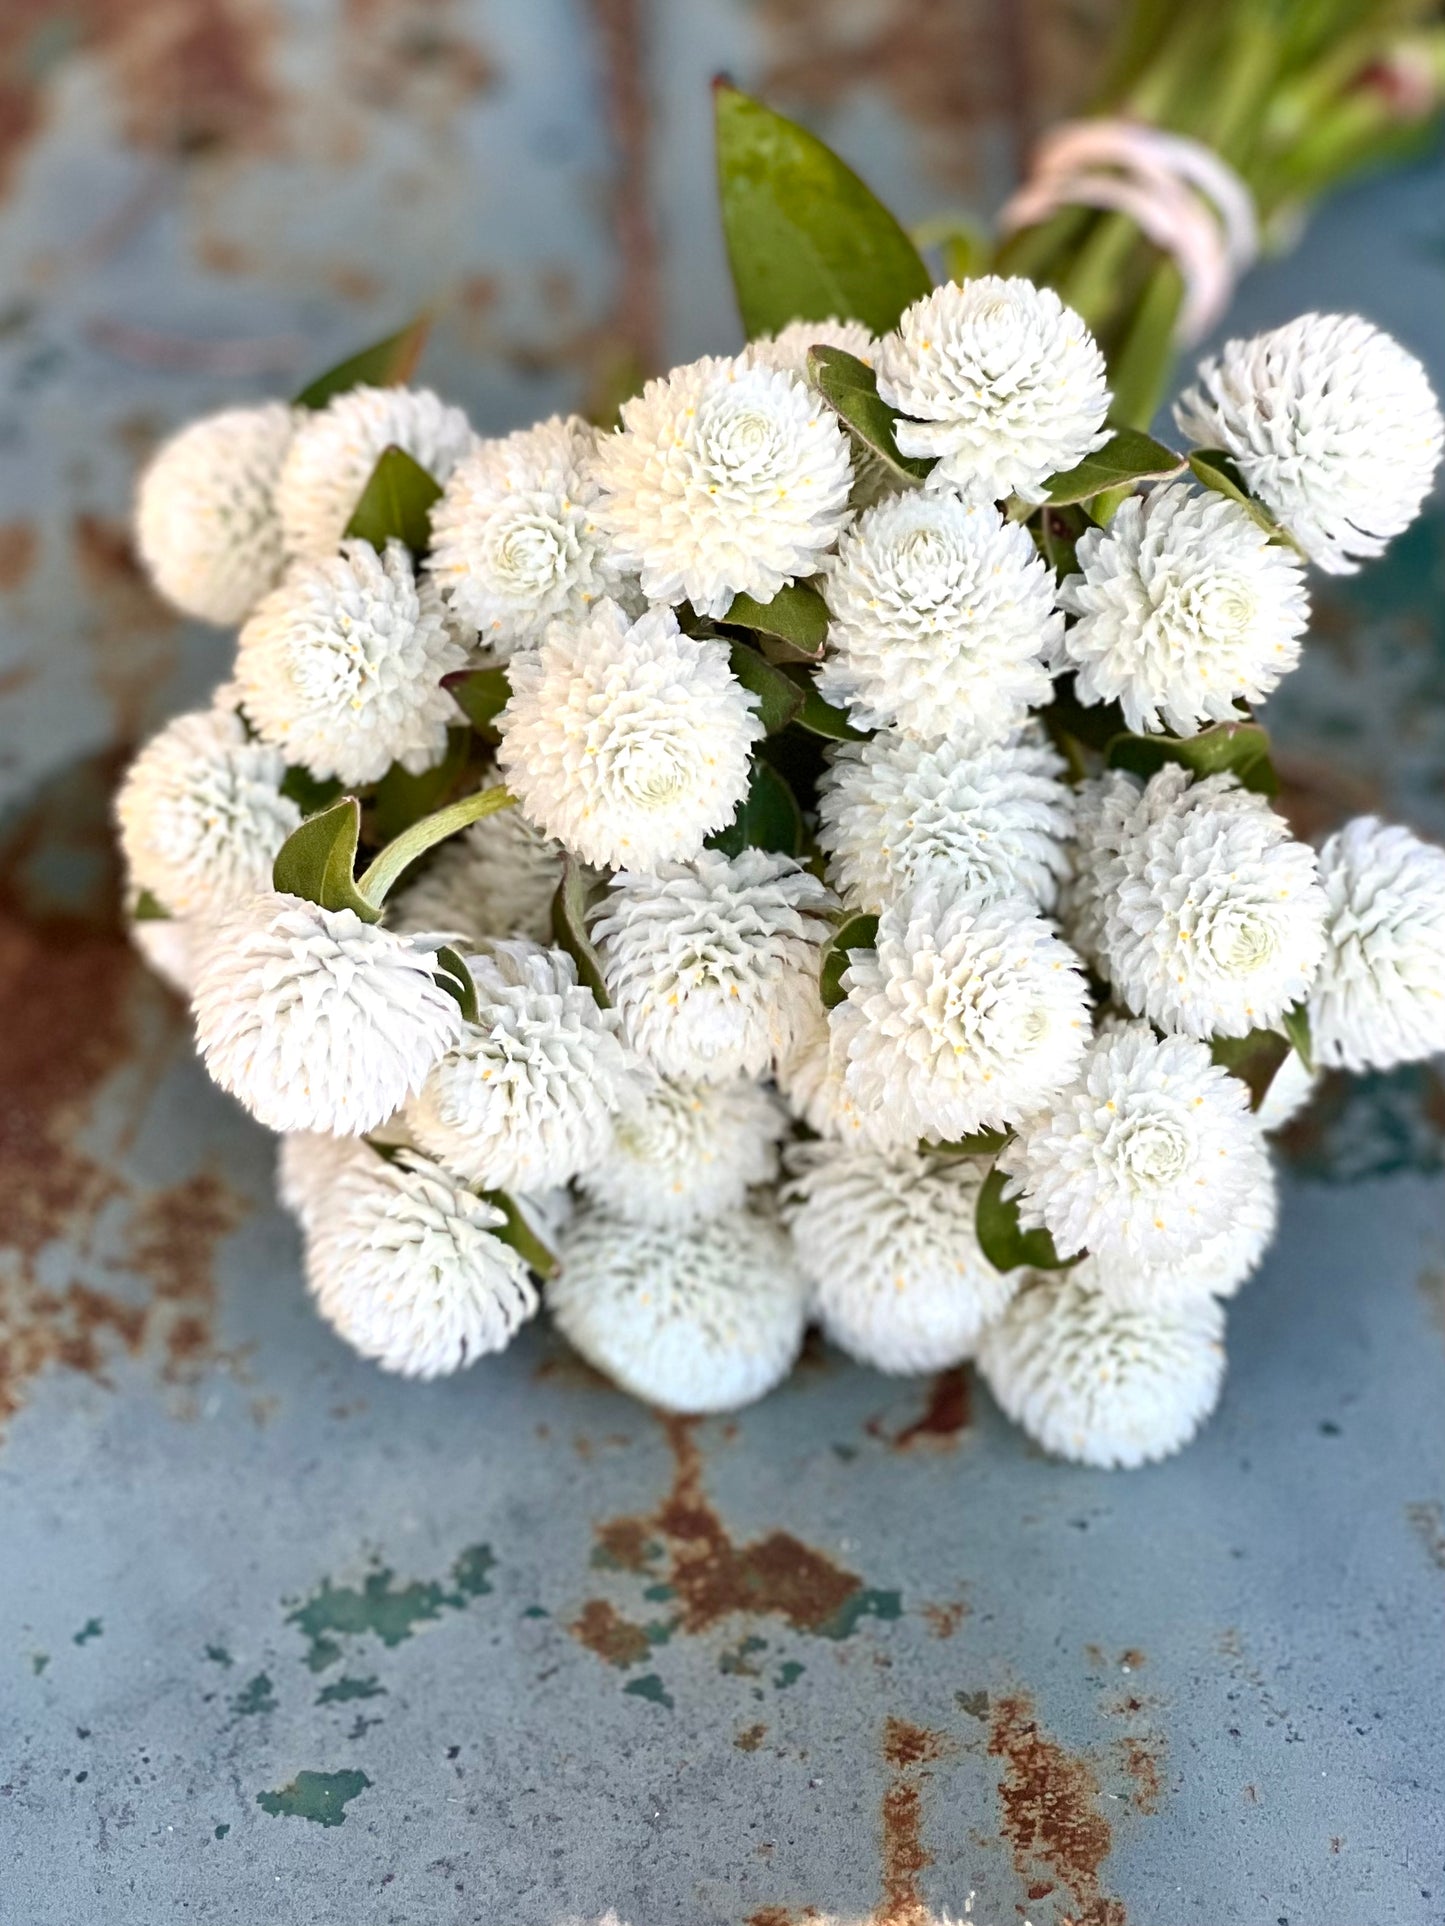 White Gomphrena Seeds, Easy to Grow Globe Amaranth for Cut Flowers and Dried Flowers